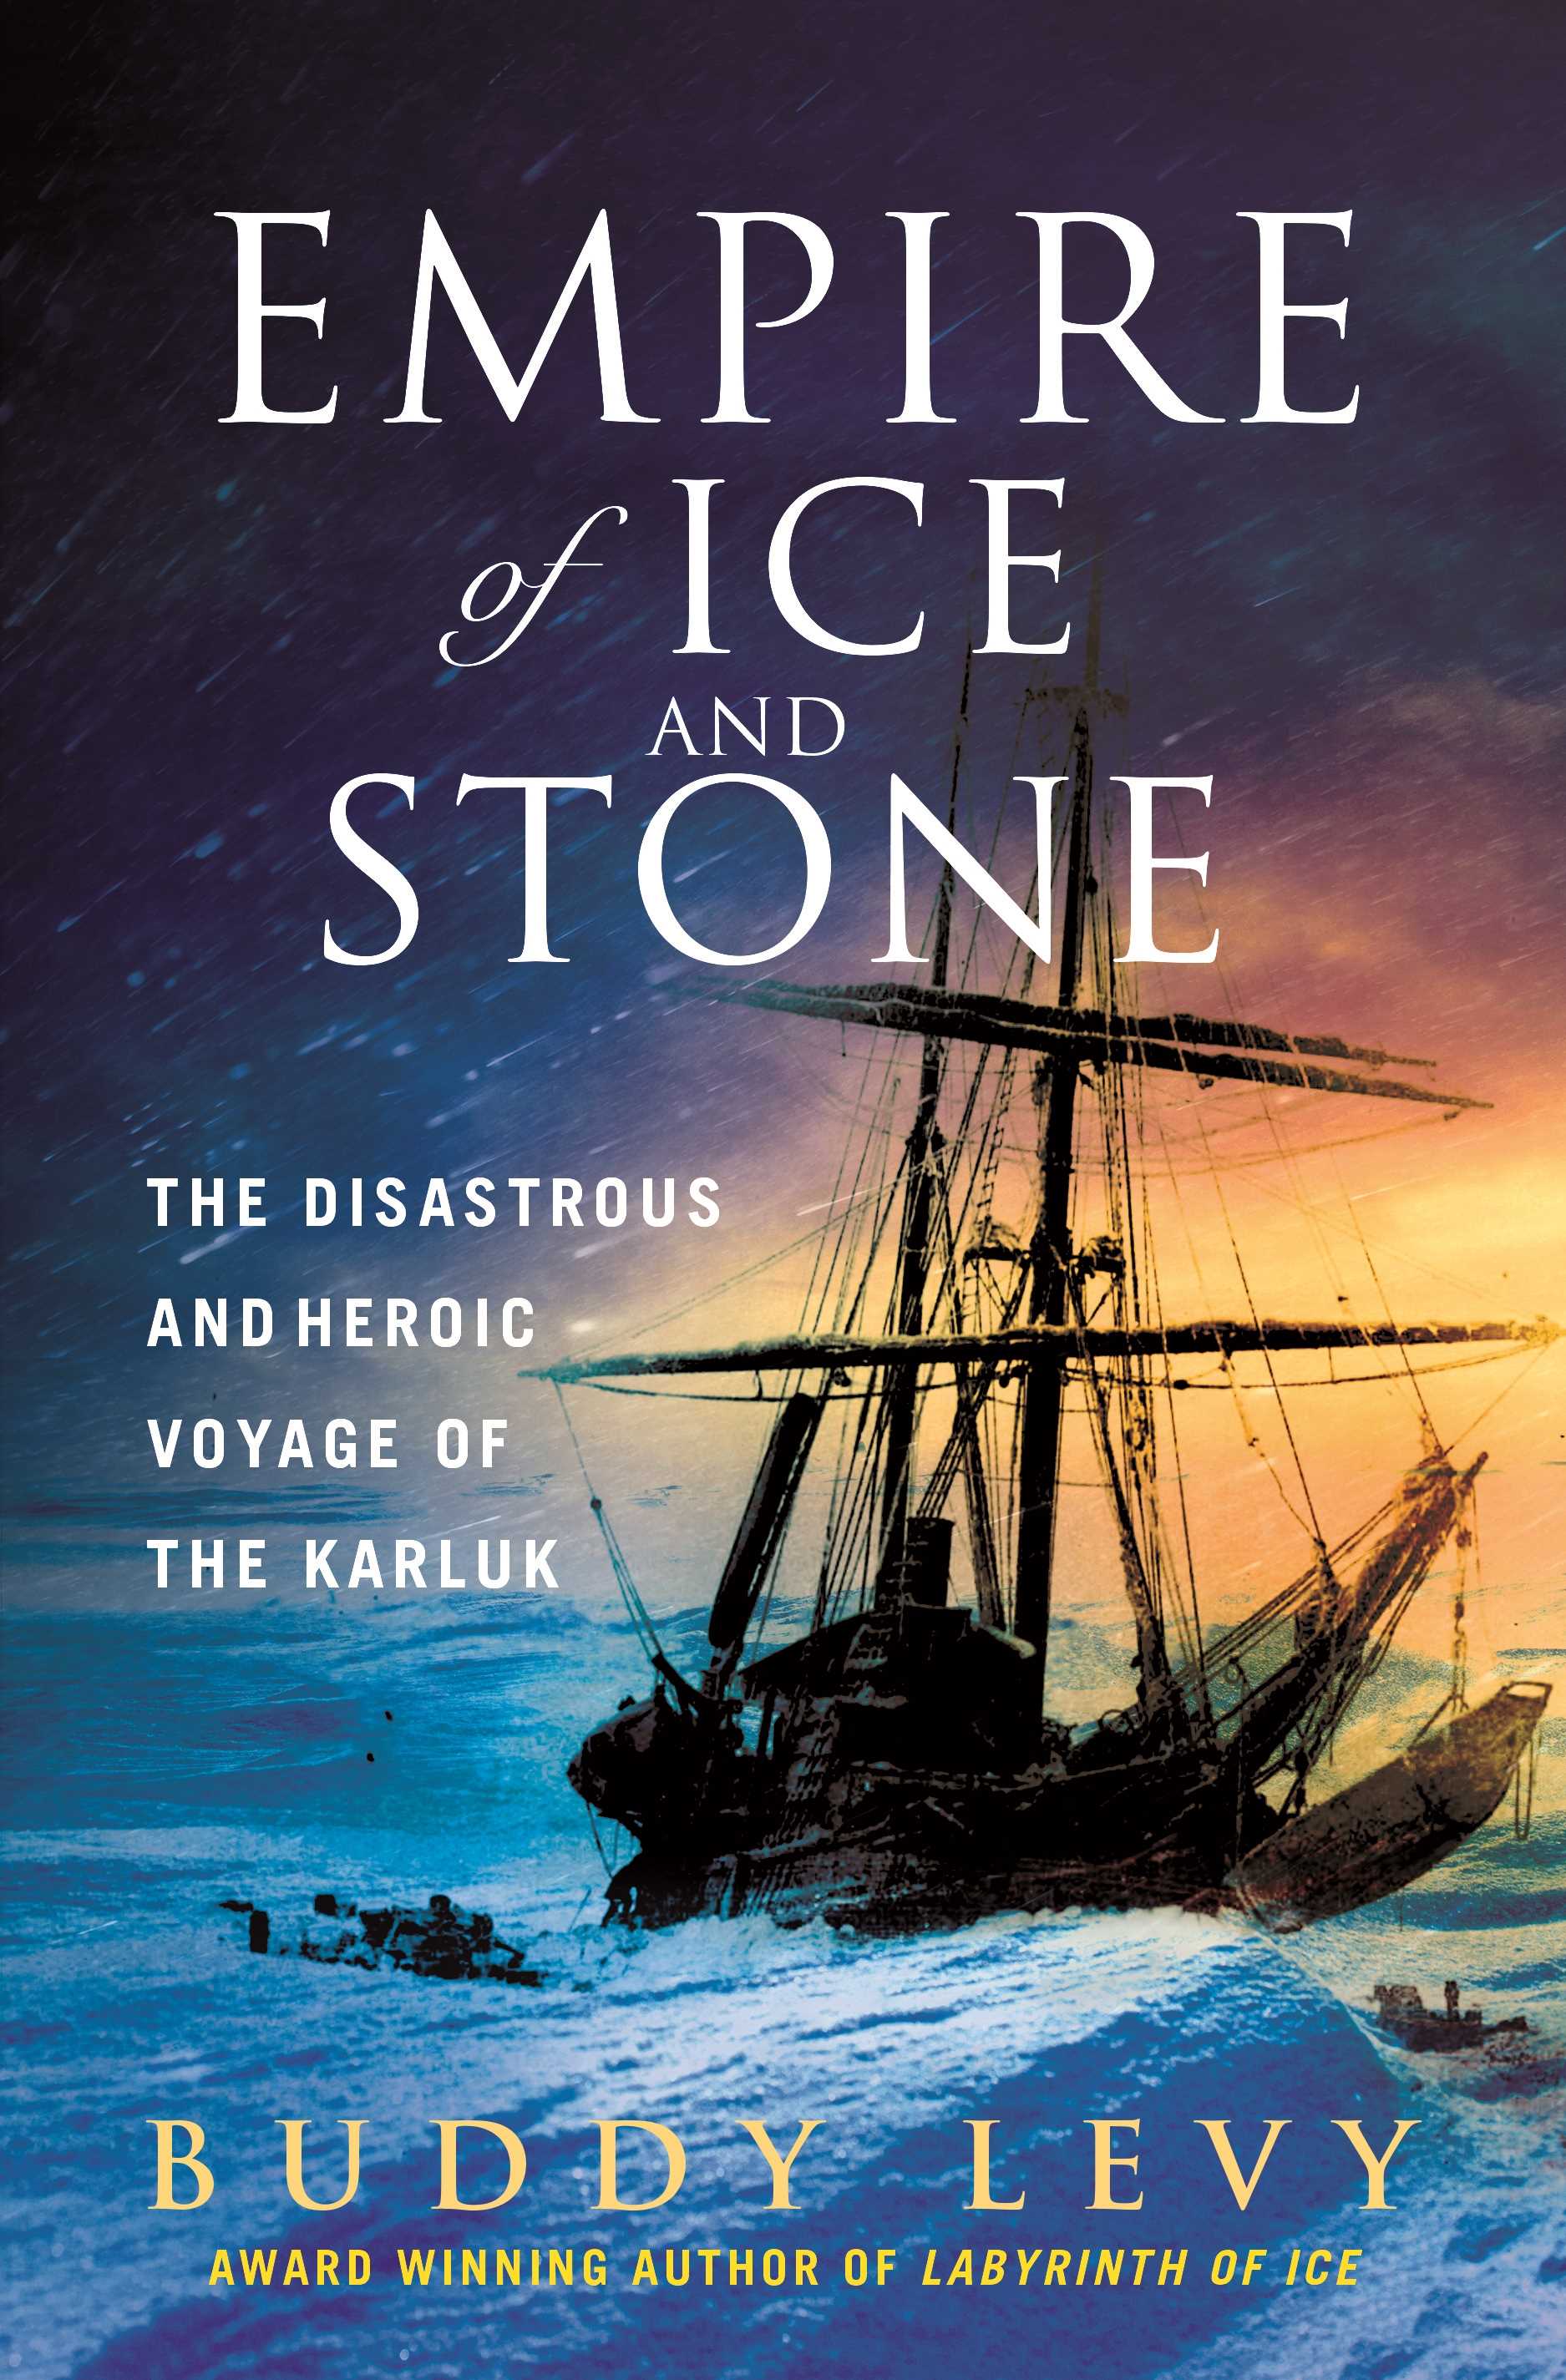 The cover of "Empire of Ice and Stone."